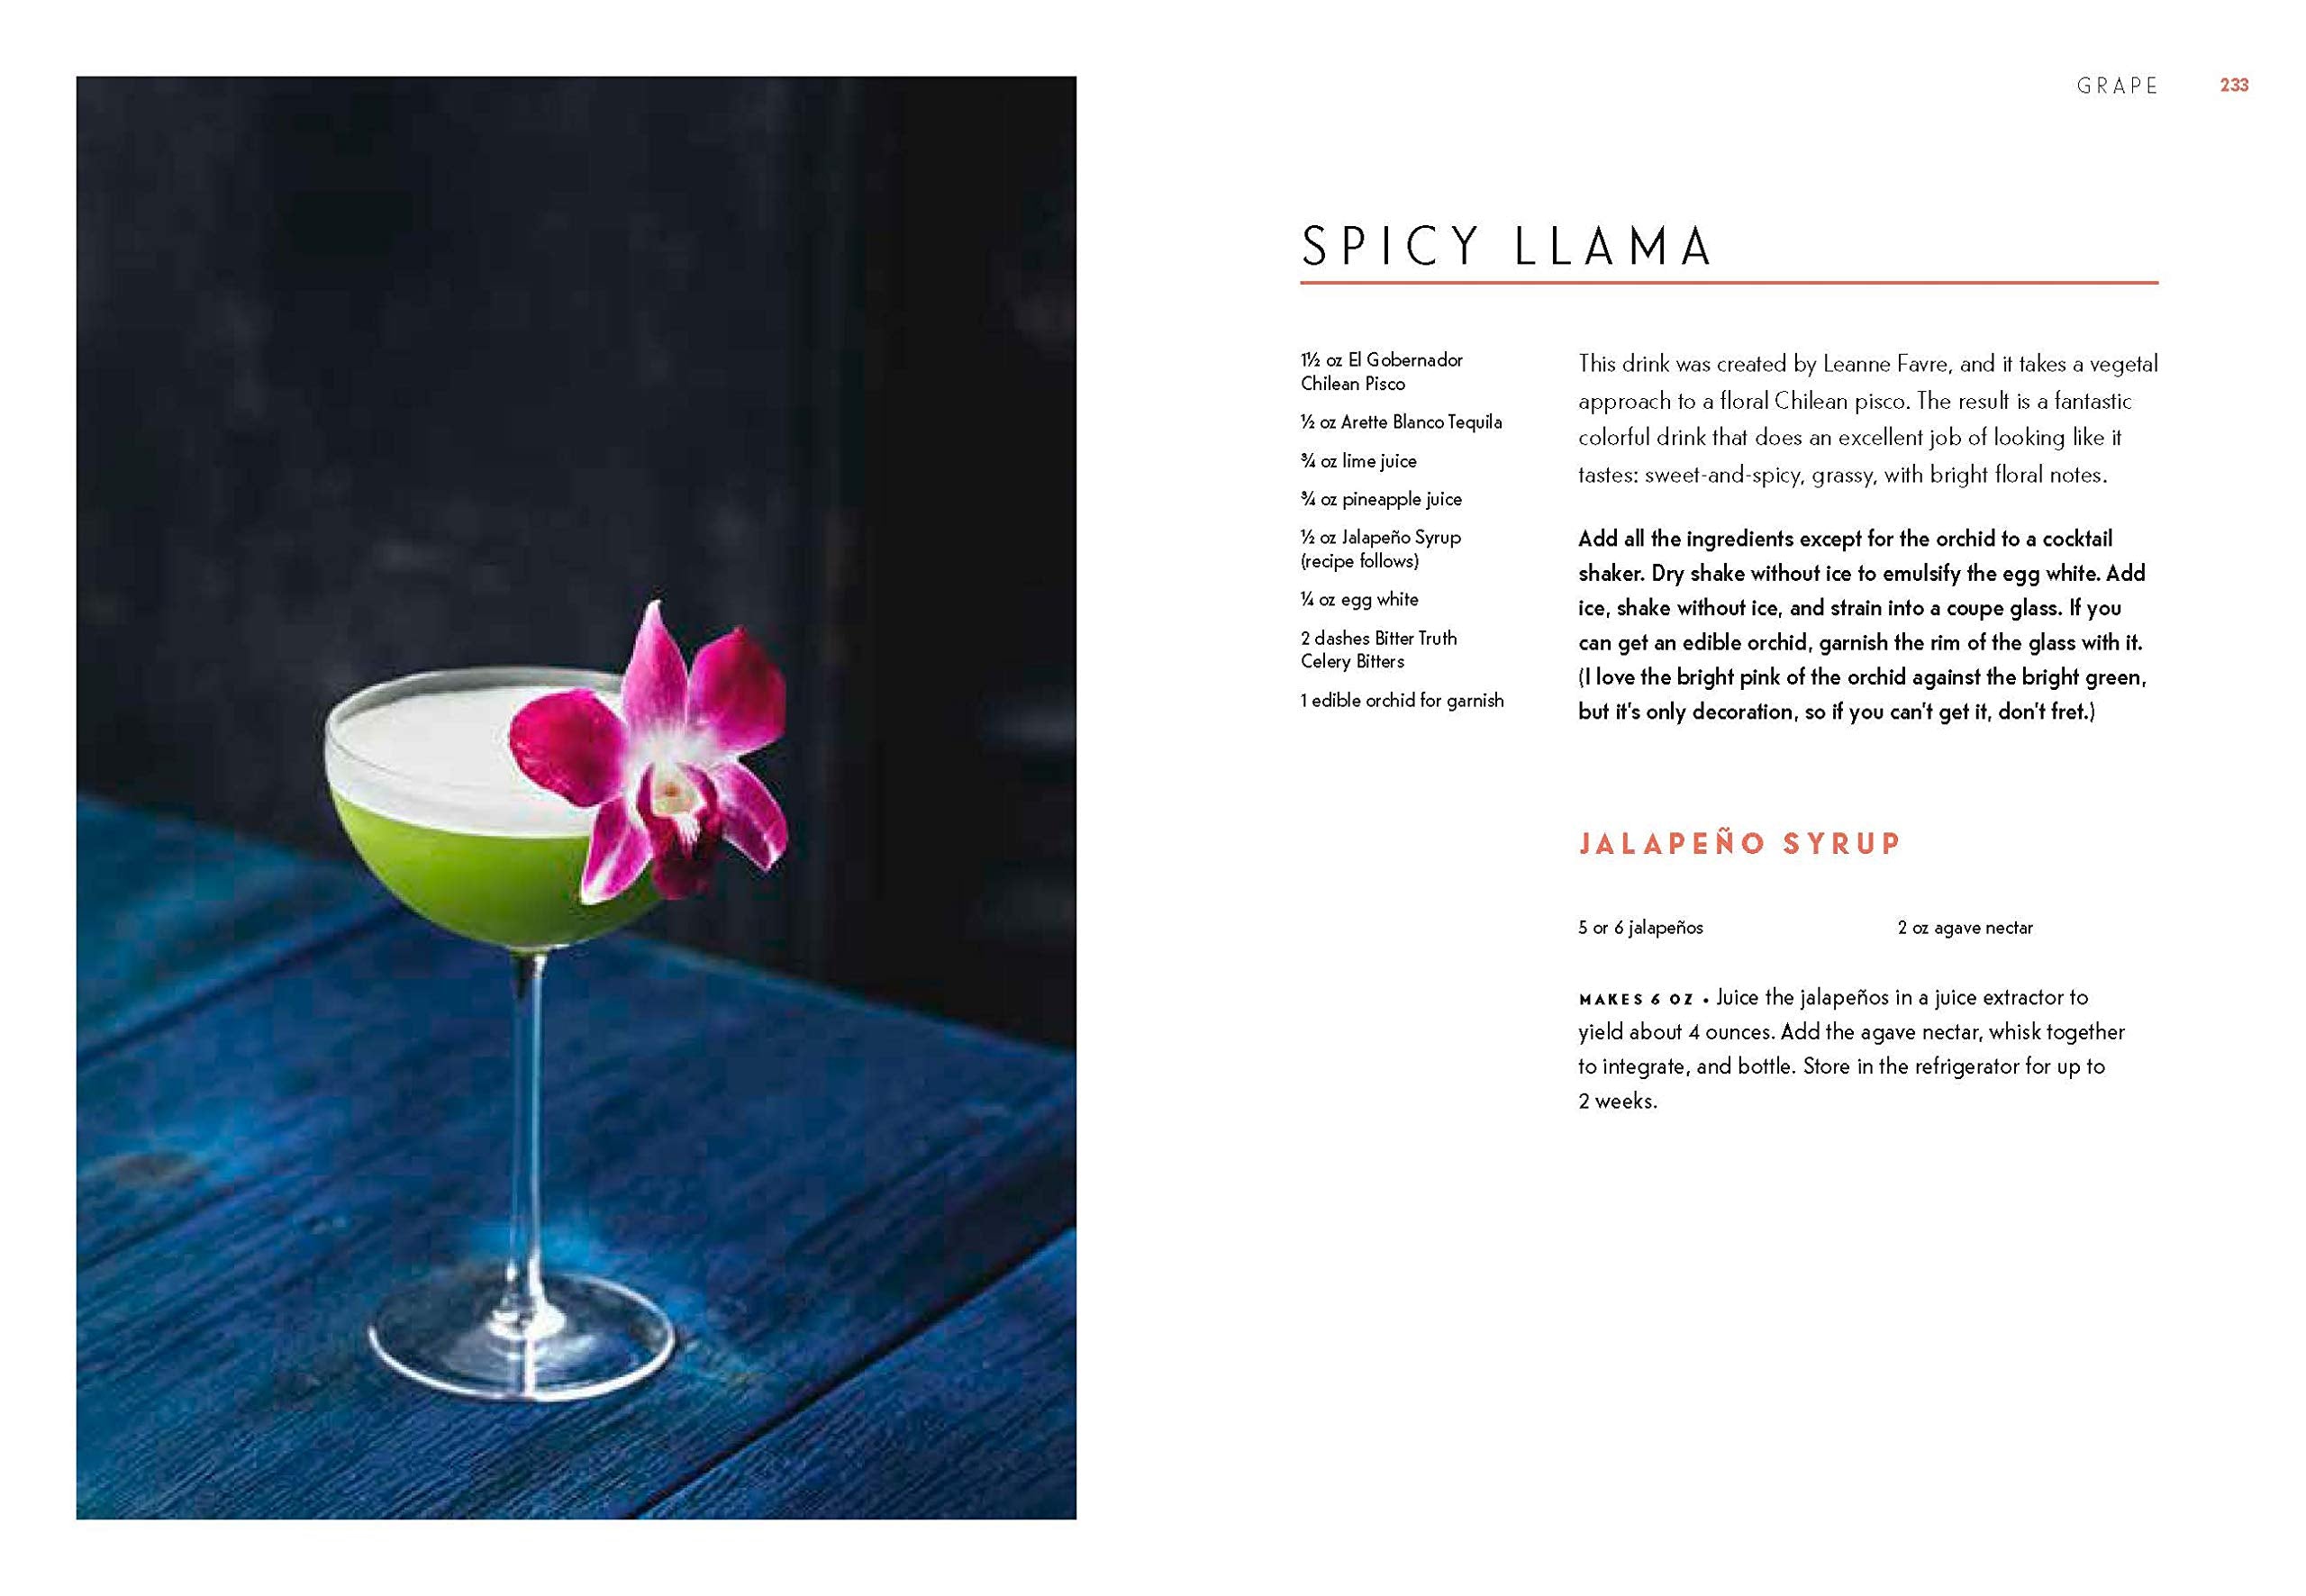 Spirits of Latin America: A Celebration of Culture & Cocktails, with 100 Recipes from Leyenda & Beyond (Ivy Mix)